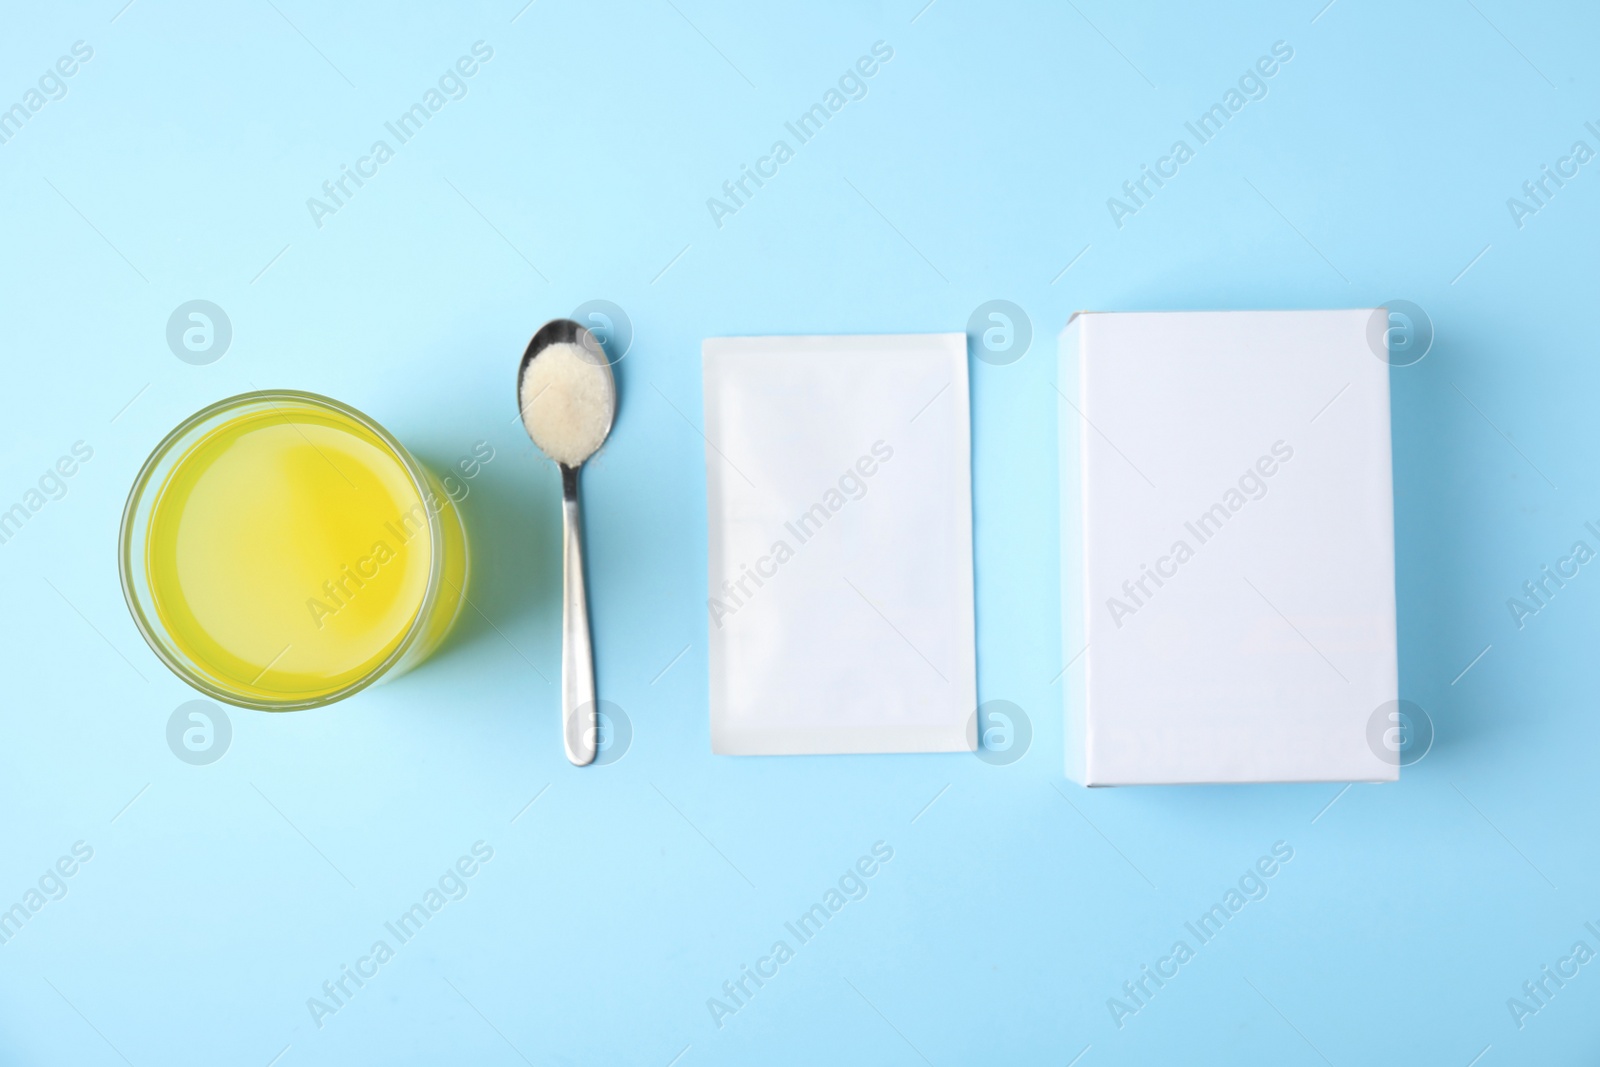 Photo of Box, sachet, spoon and glass of dissolved medicine on turquoise background, flat lay